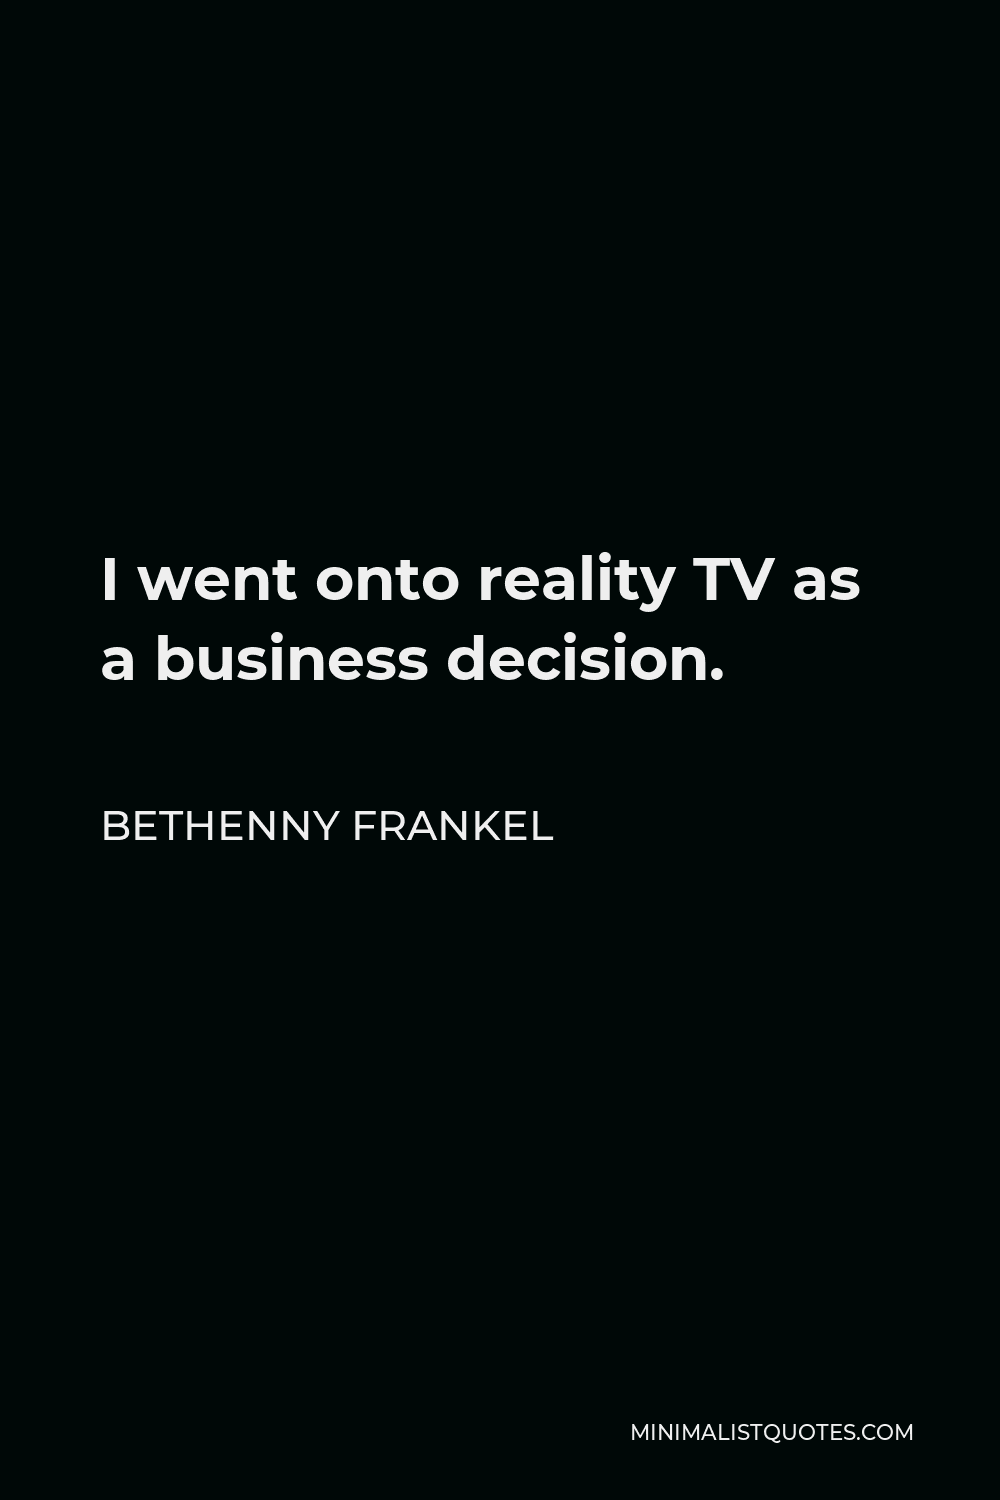 Bethenny Frankel Quote - I went onto reality TV as a business decision.